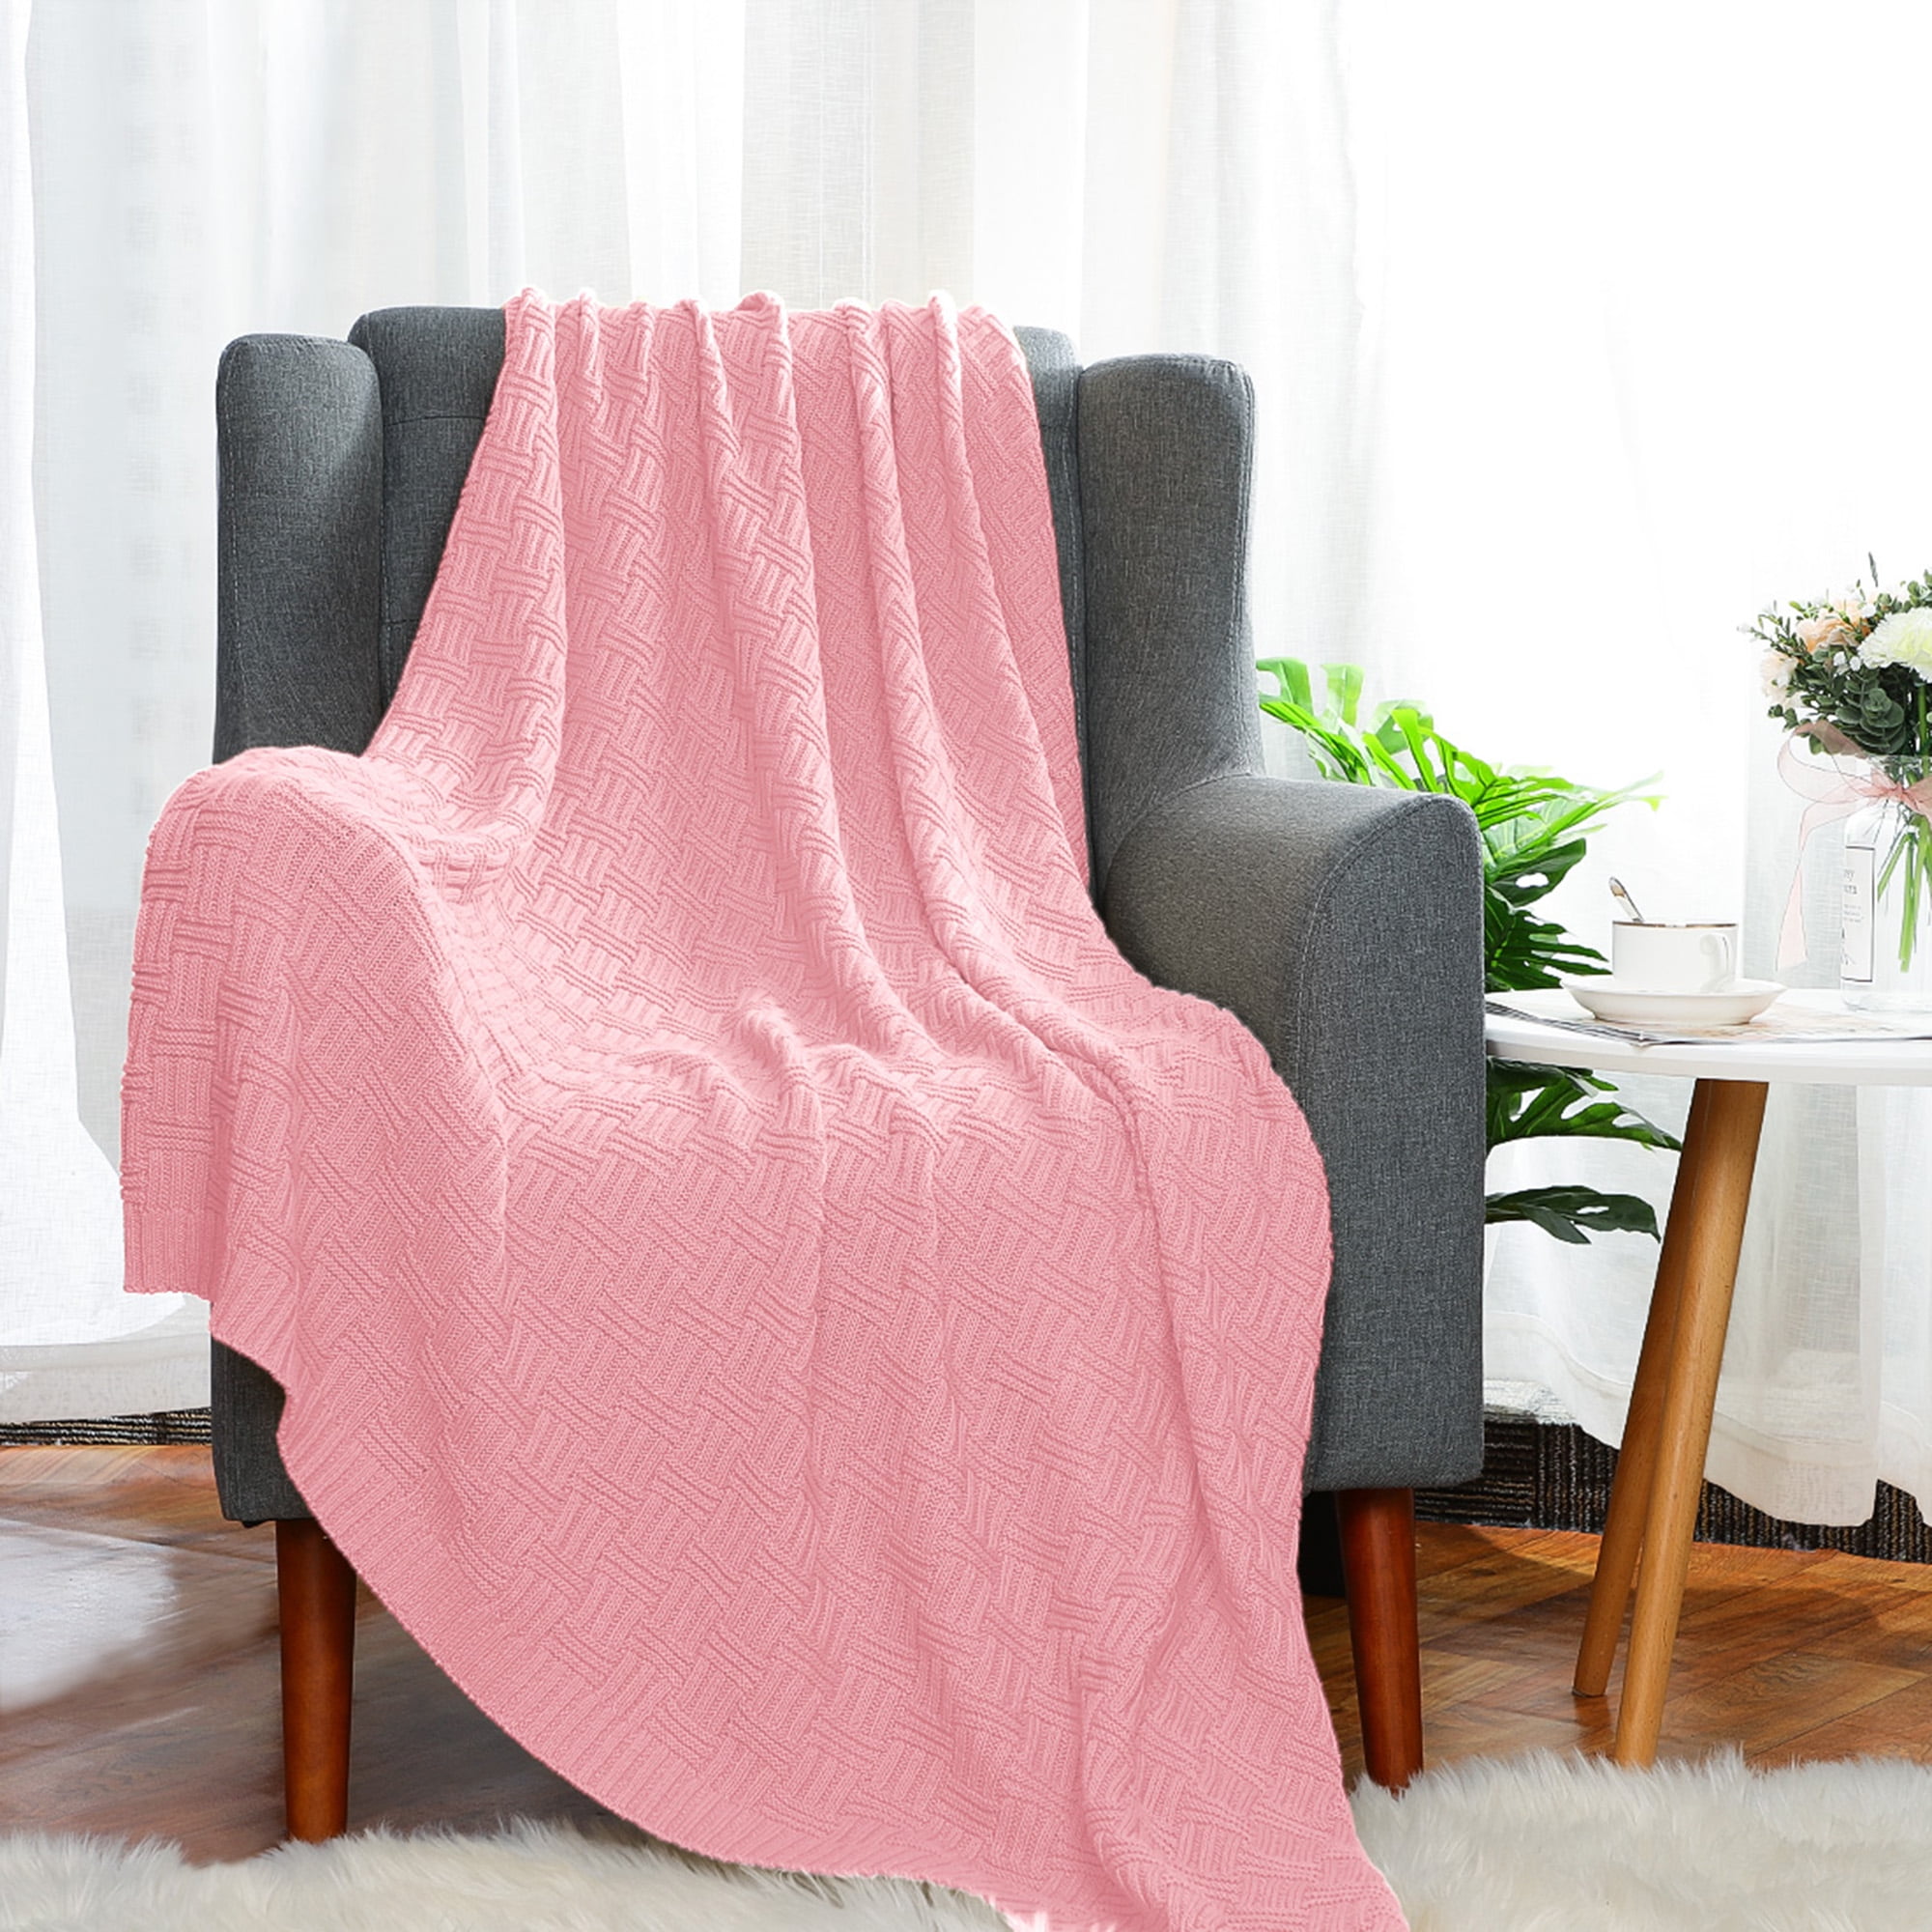 New soft snugly Cable knitted throw blanket for beds sofa armchair 120x180cm 